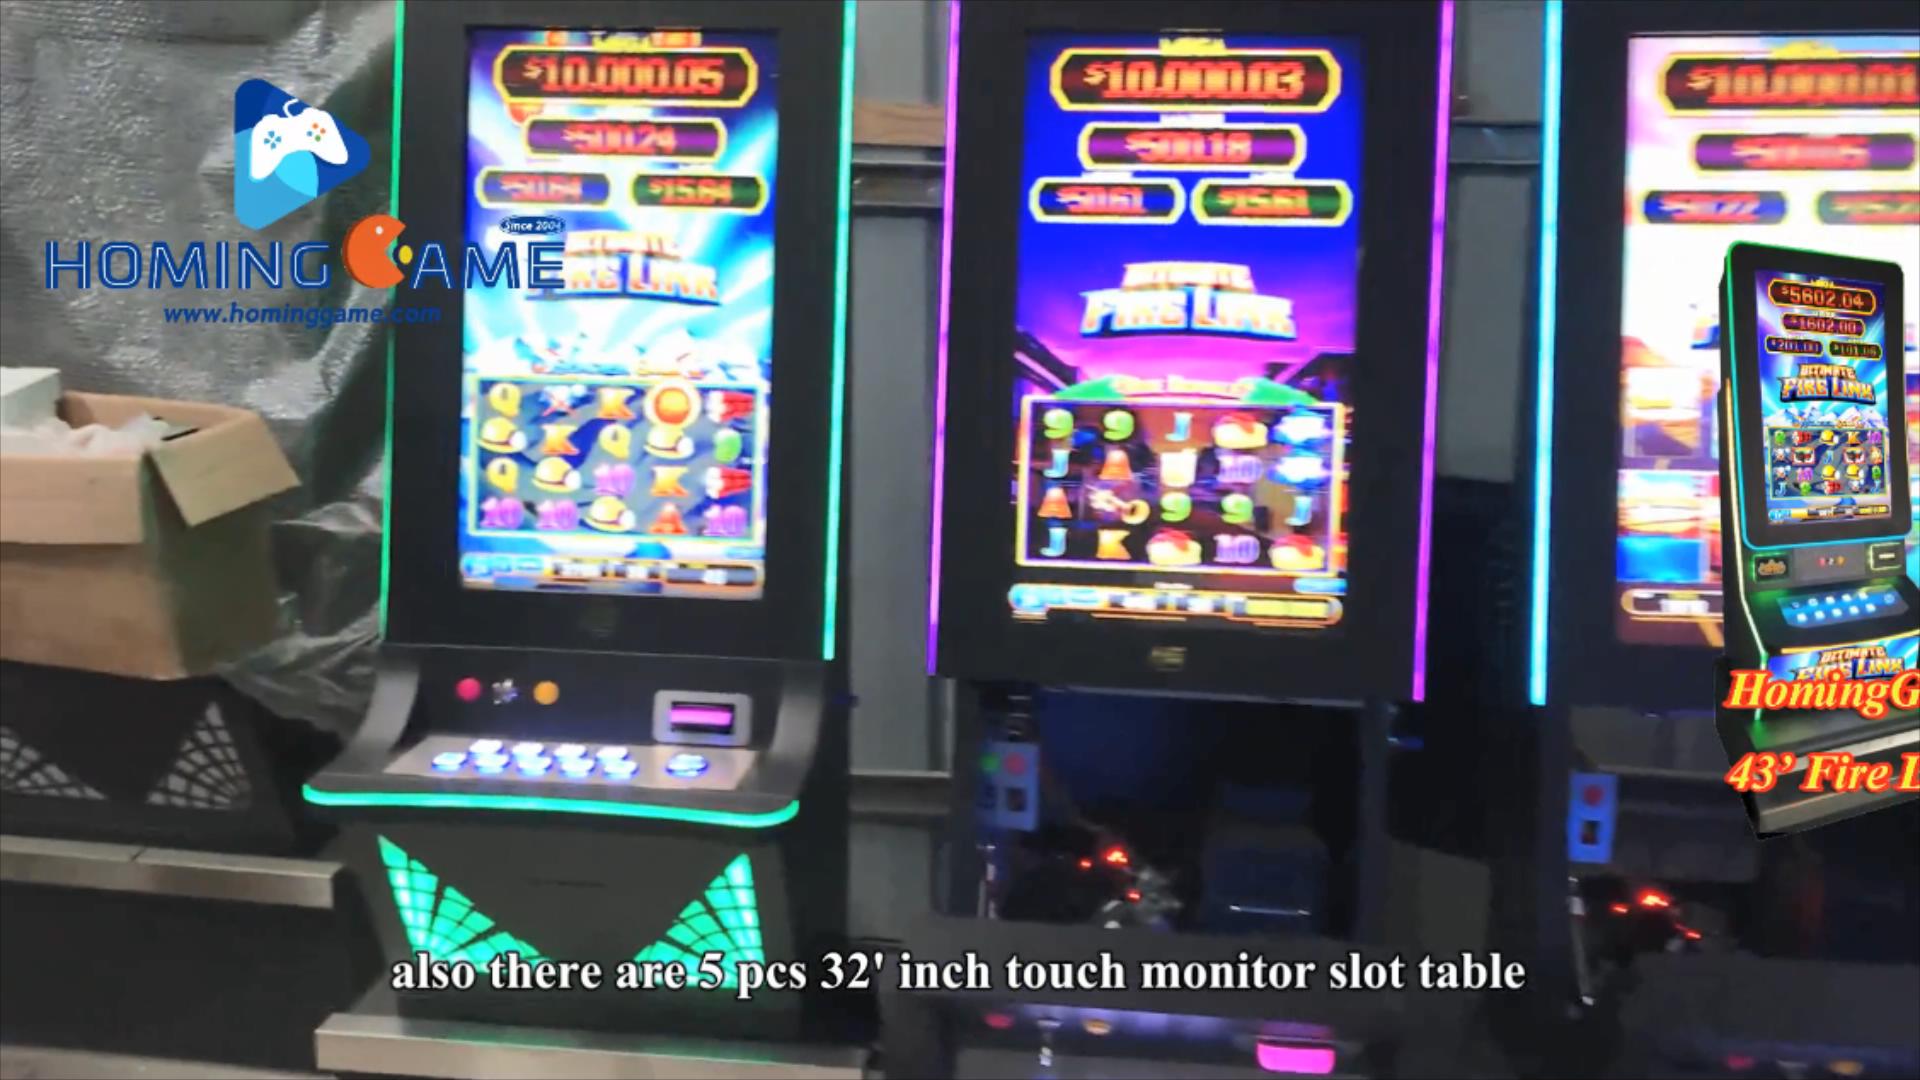 USA Hot Sale 43' Touch Monitor 8 in 1 Fire Link Slot Table Game Machine